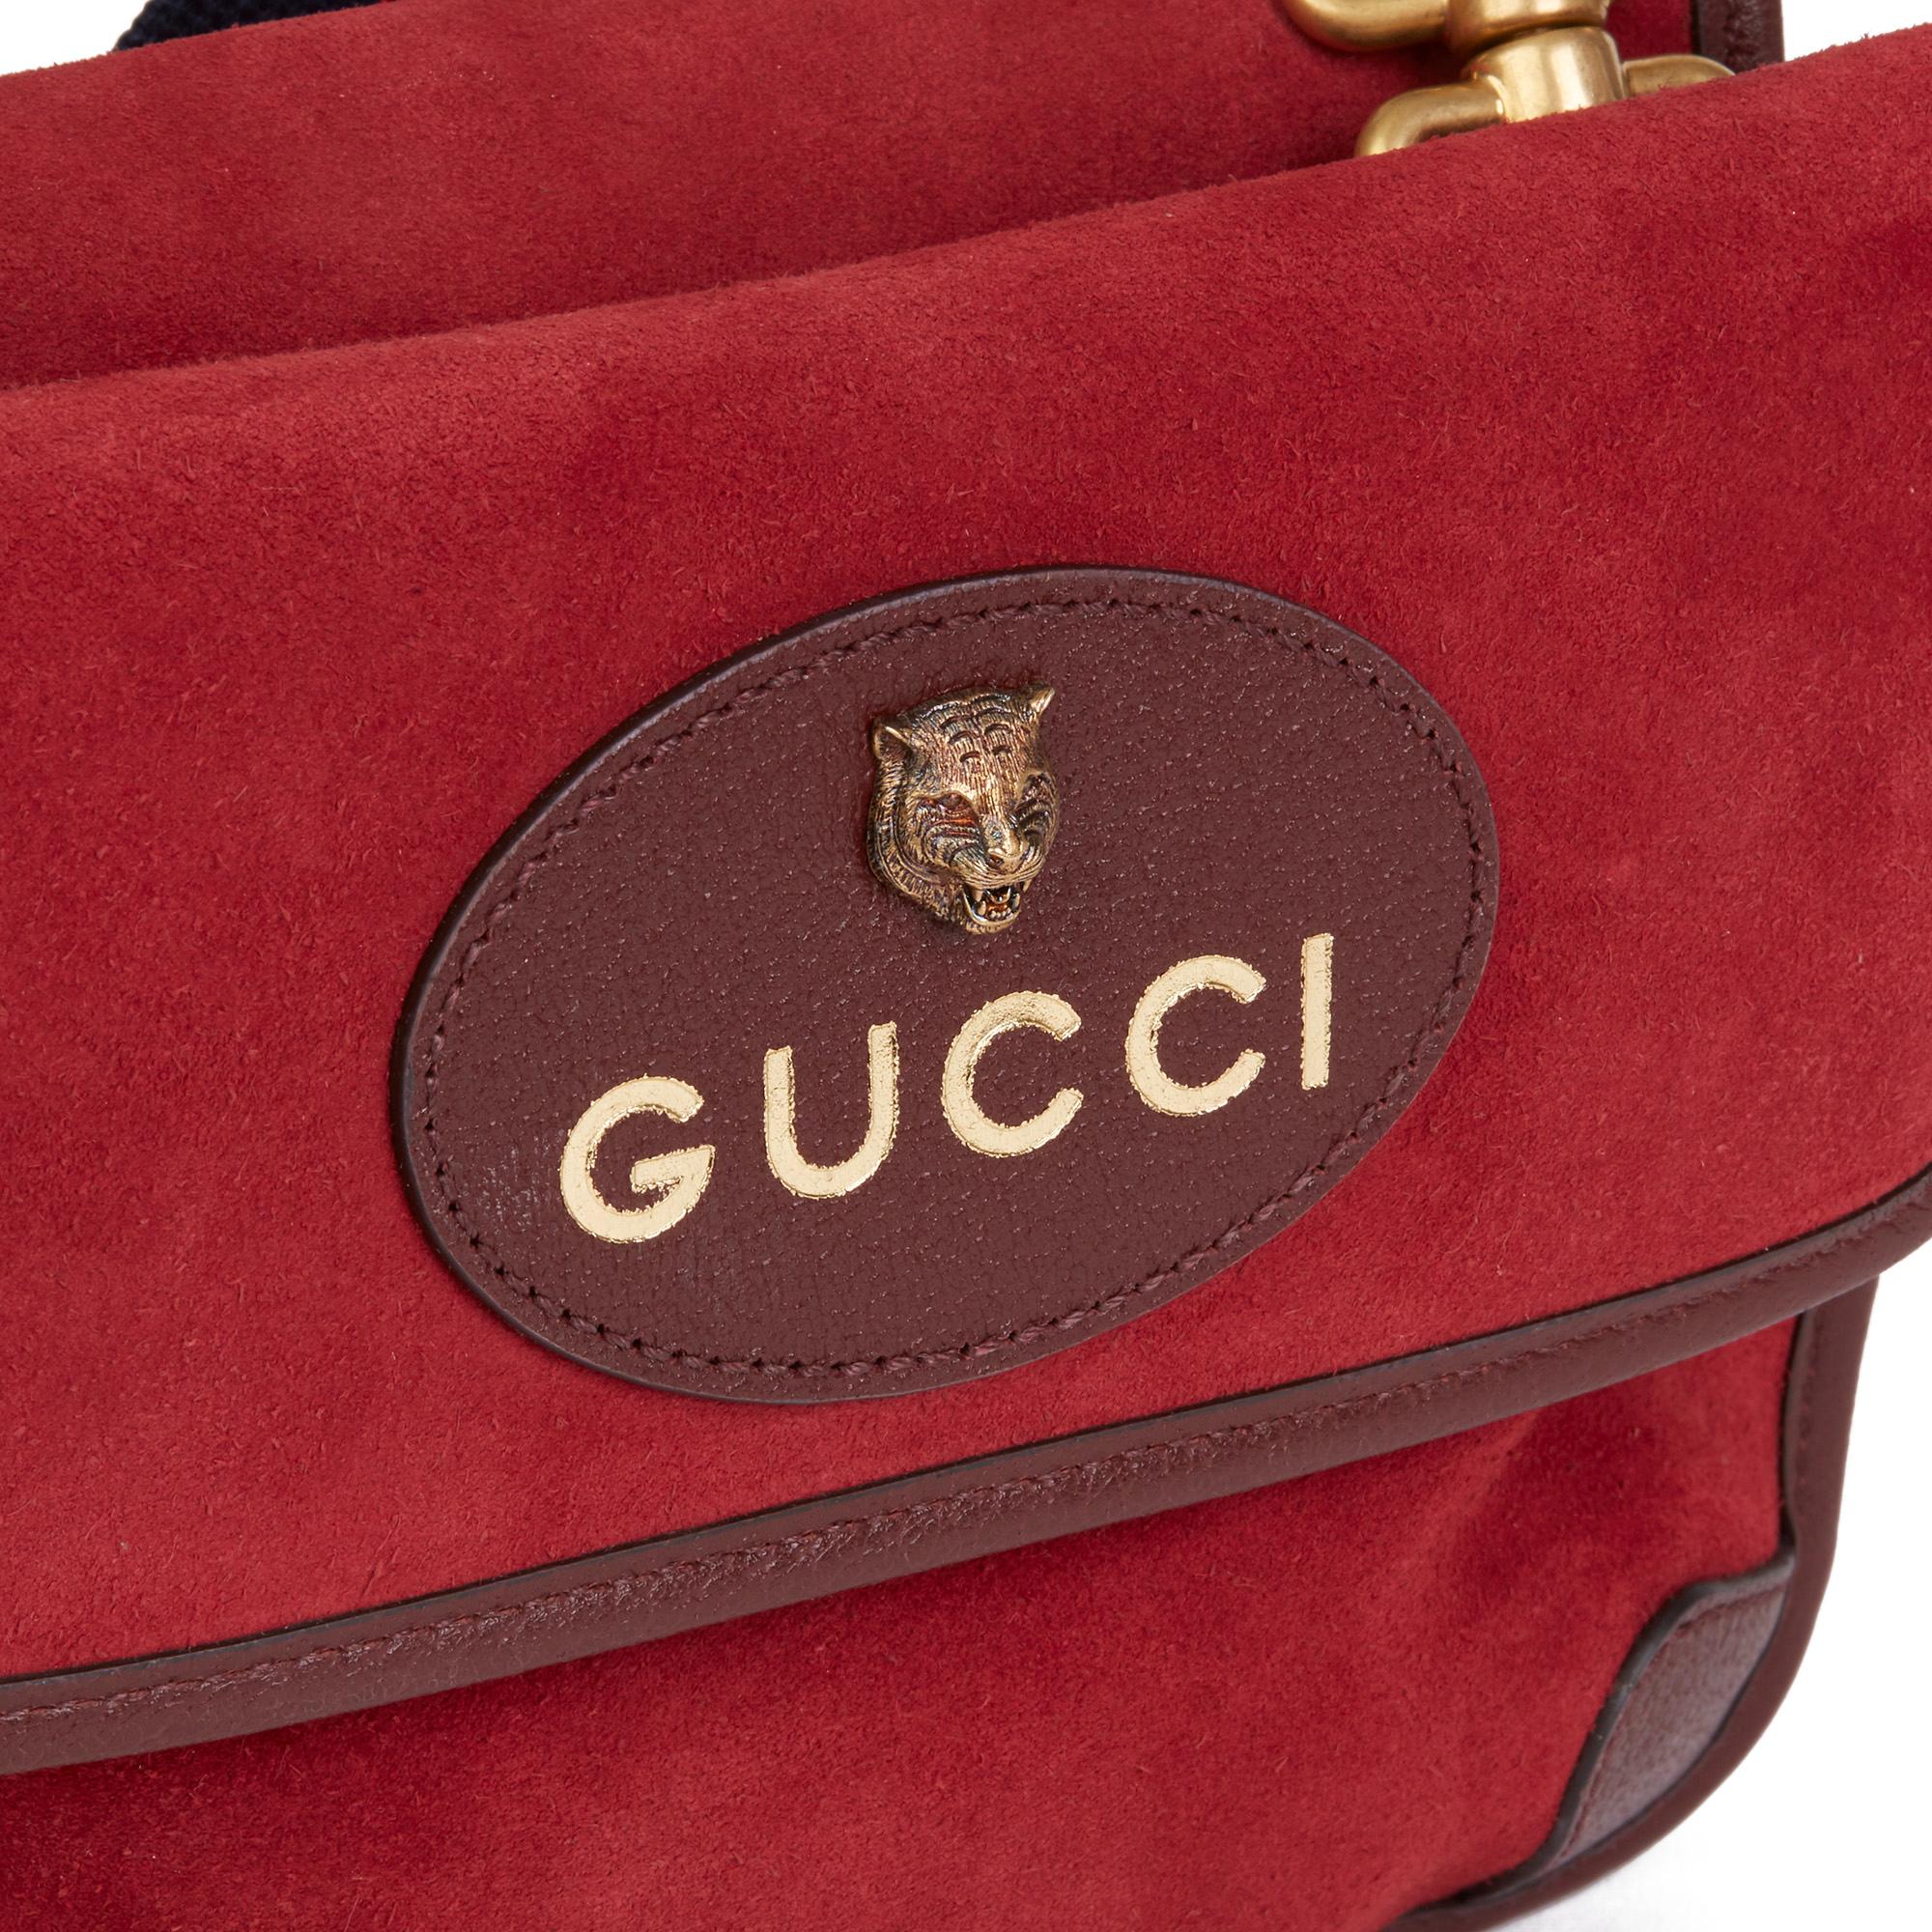 2020 Gucci Red Suede & Burgundy Pigskin, Navy Web Small Messenger Bag 2